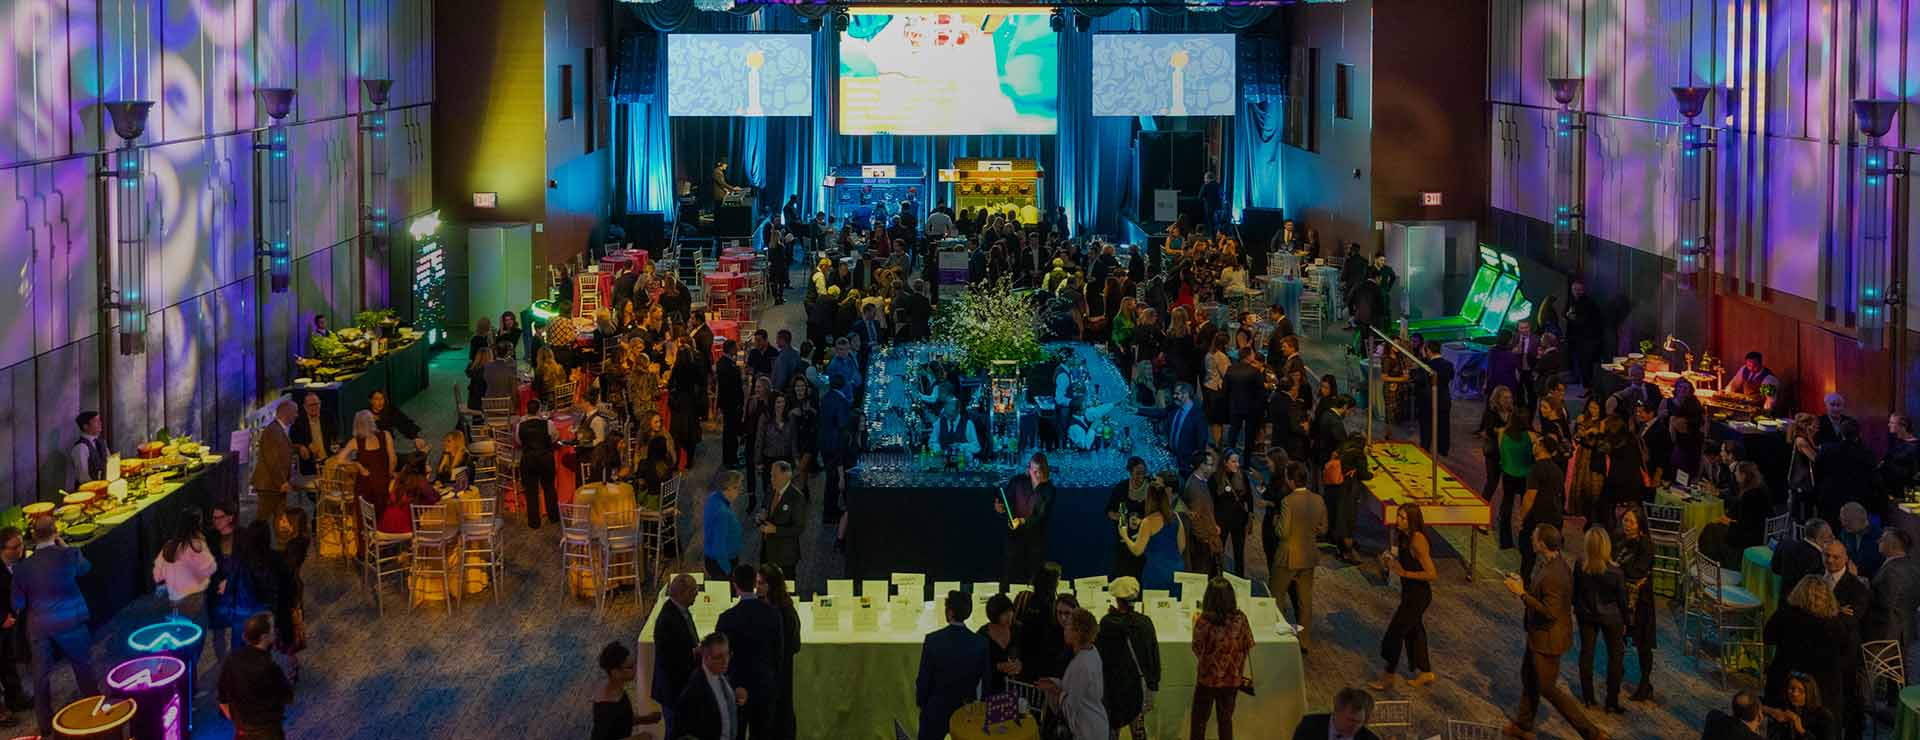 An aerial view of an NYU Langone fundraising event with a crowd of people in a ballroom